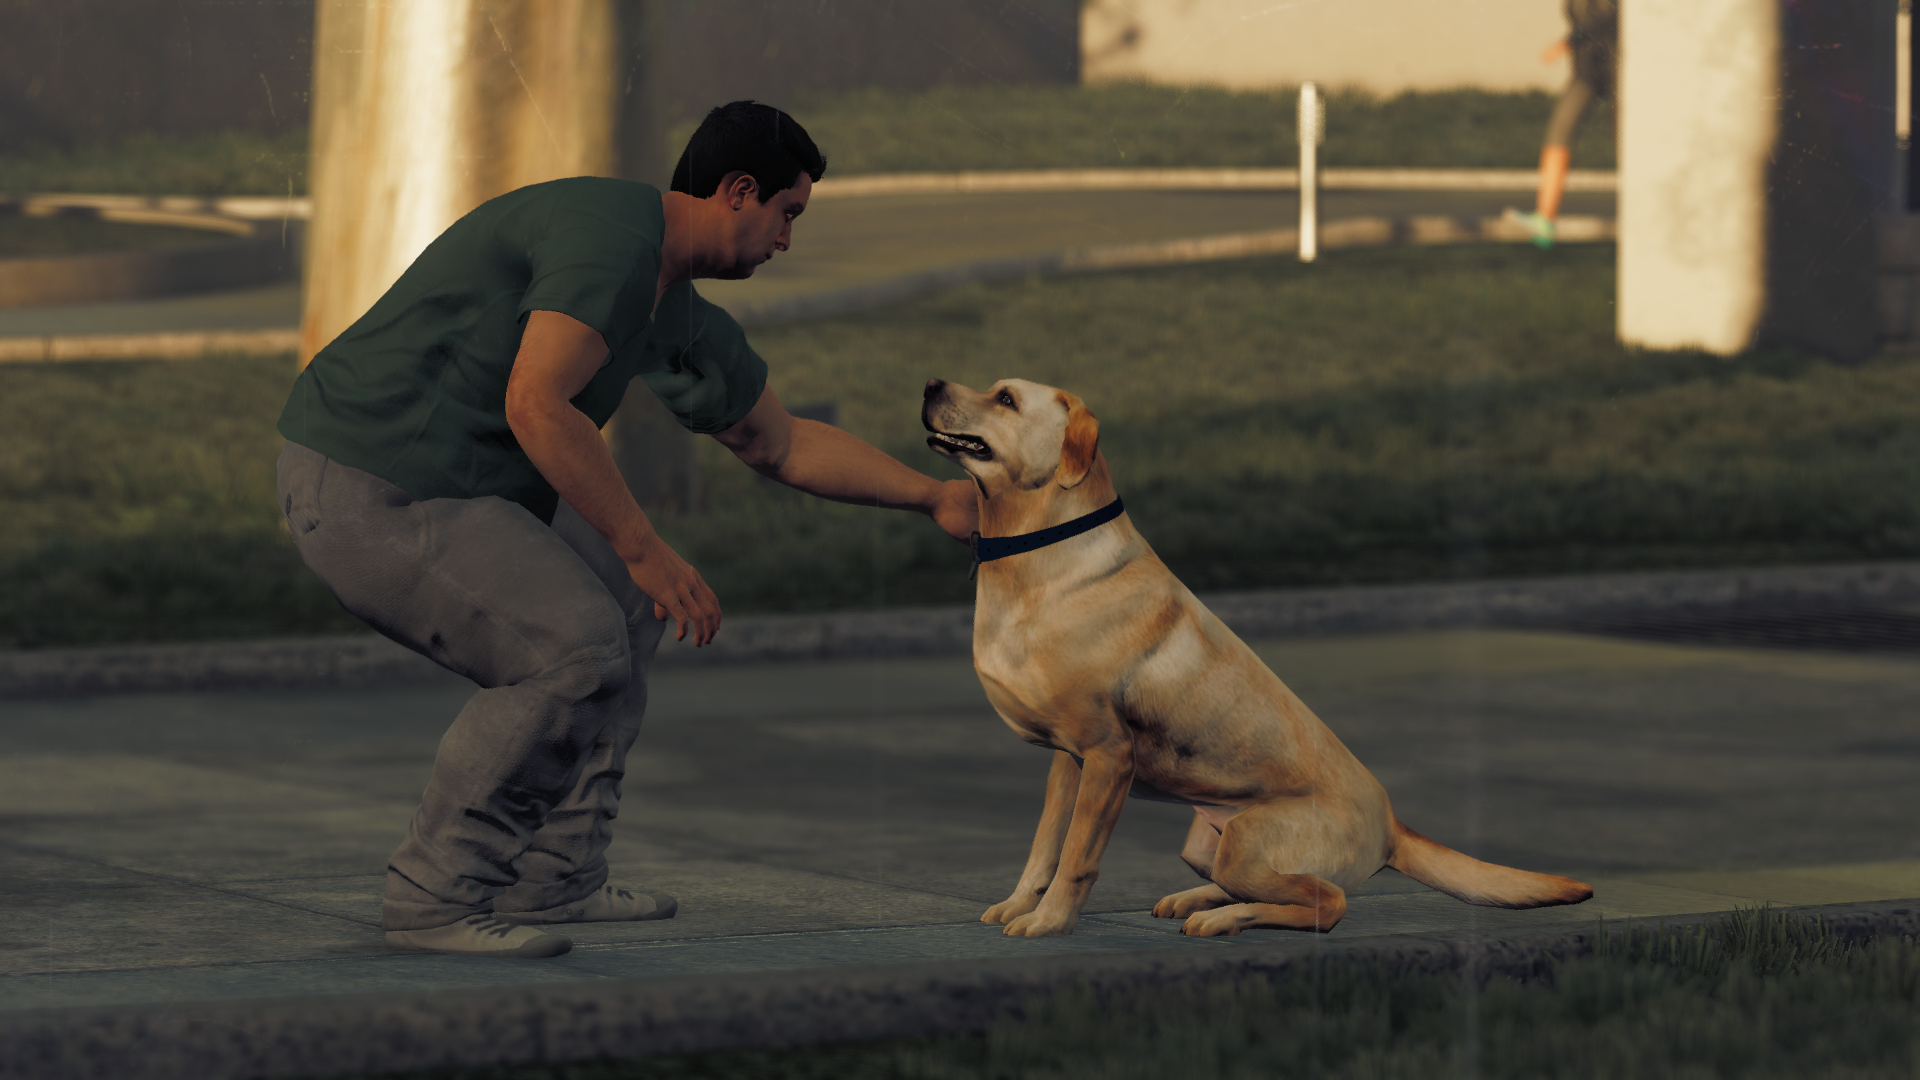 1488189177-watch-dogs-r-2-20170227094001.png